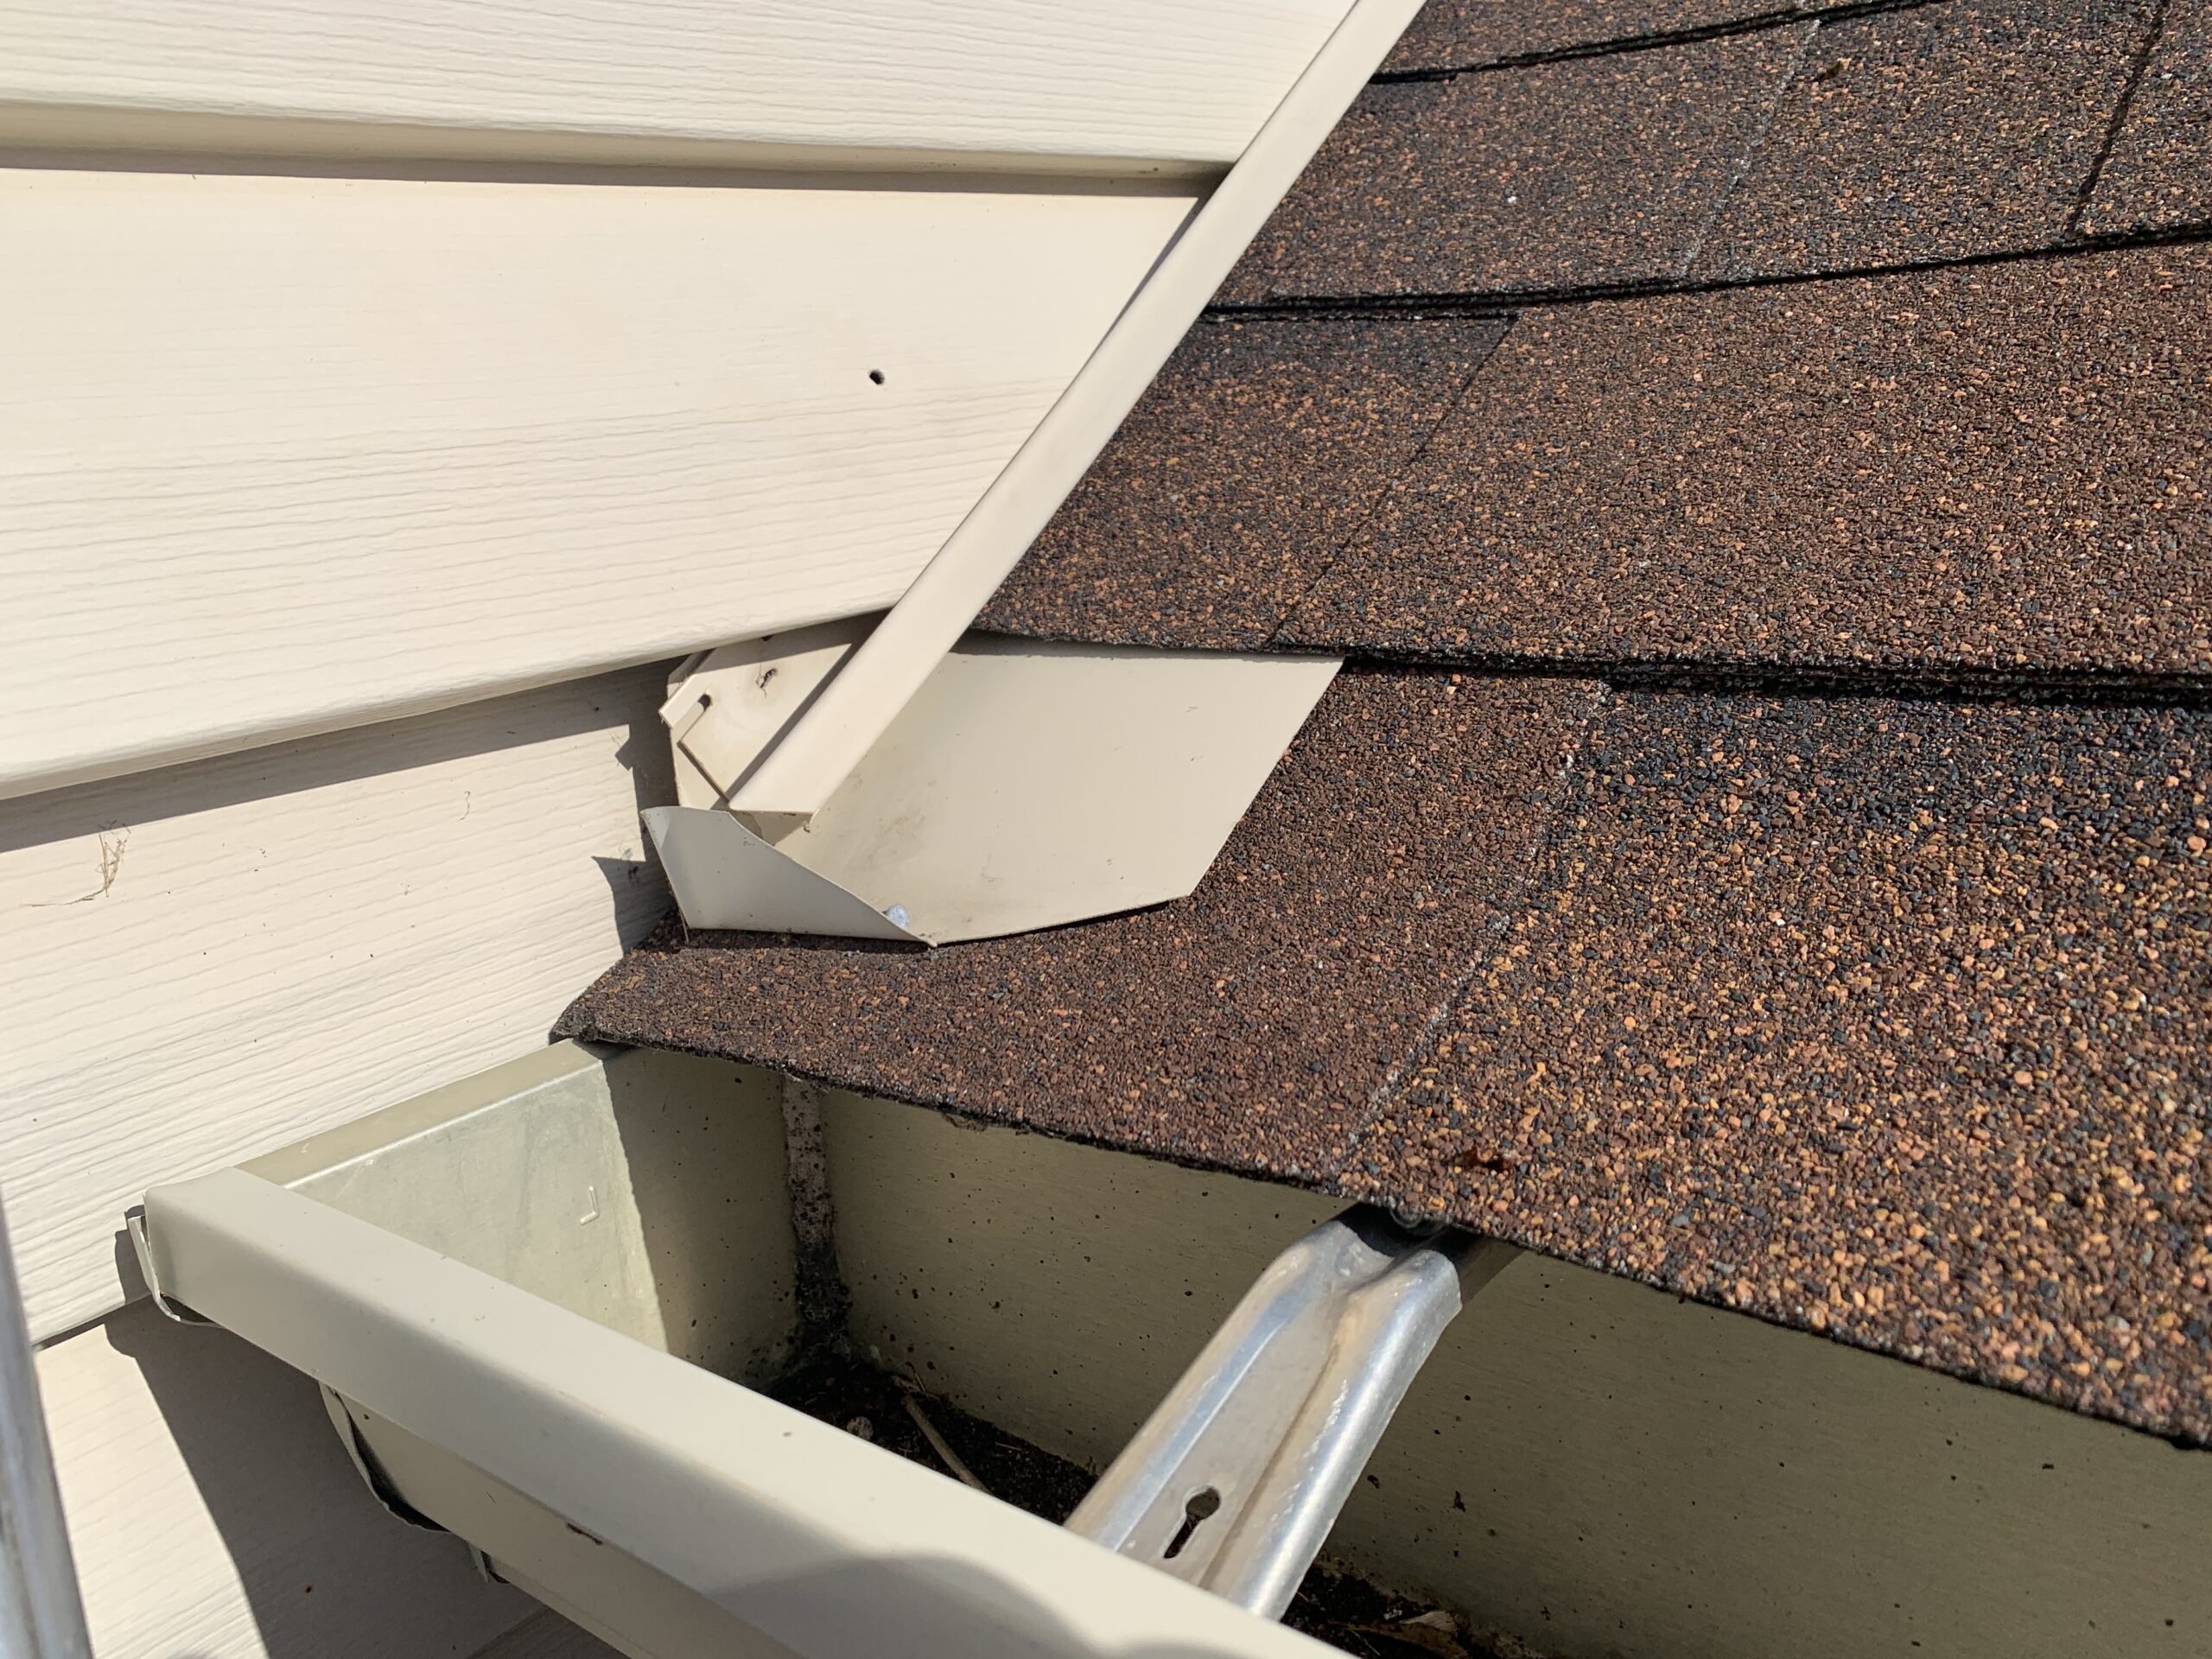 A diverter at the edge of gutter is preventing water from seeping between the endcap at the end of the gutter and the vinyl siding